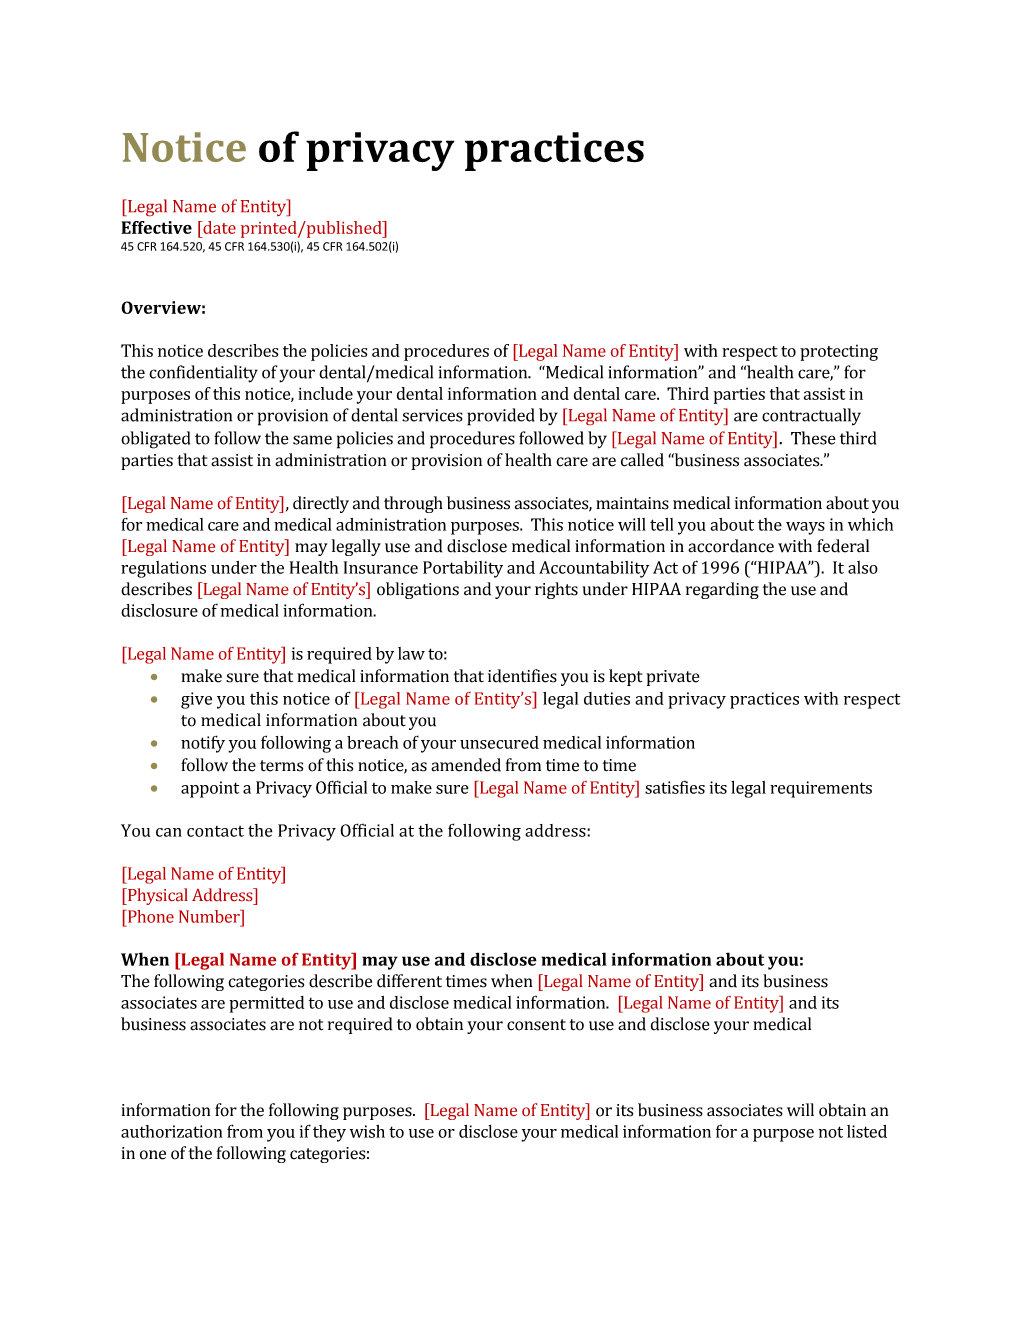 Notice of Privacy Practices s20